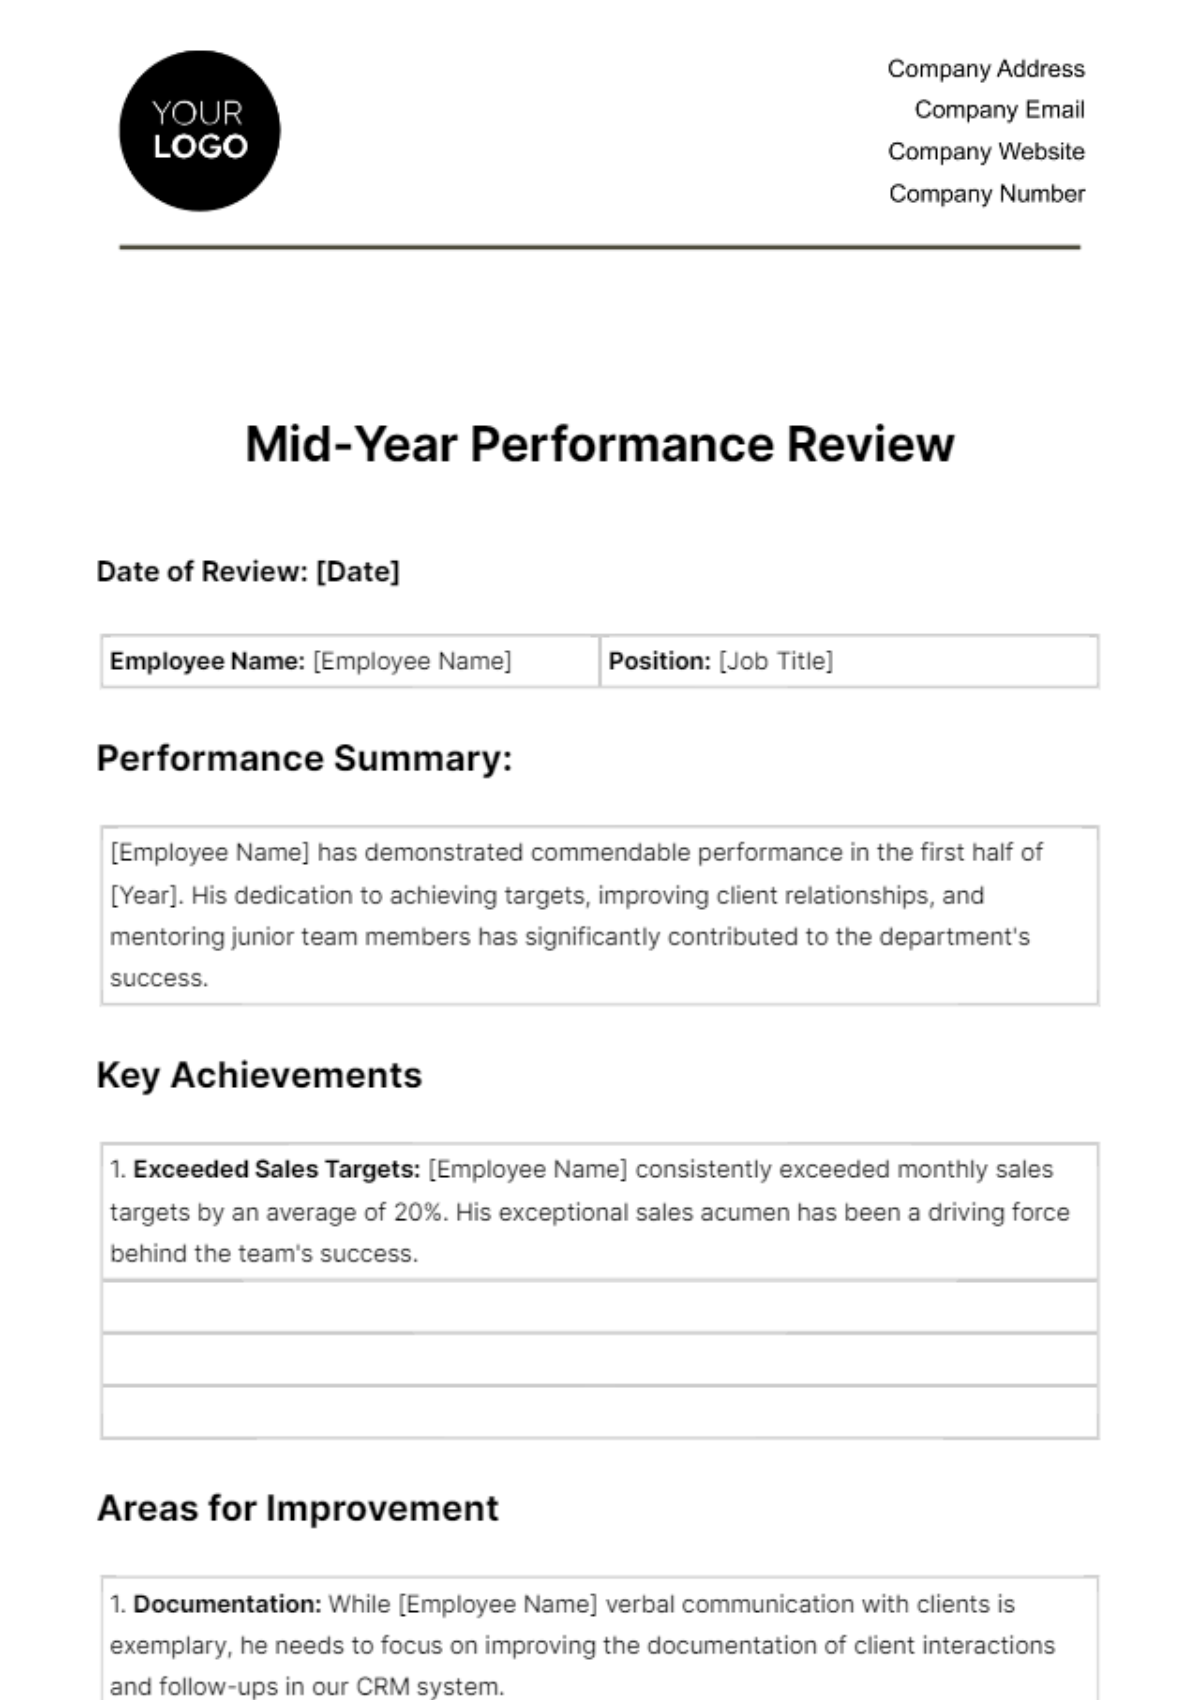 Mid-Year Performance Review HR Template